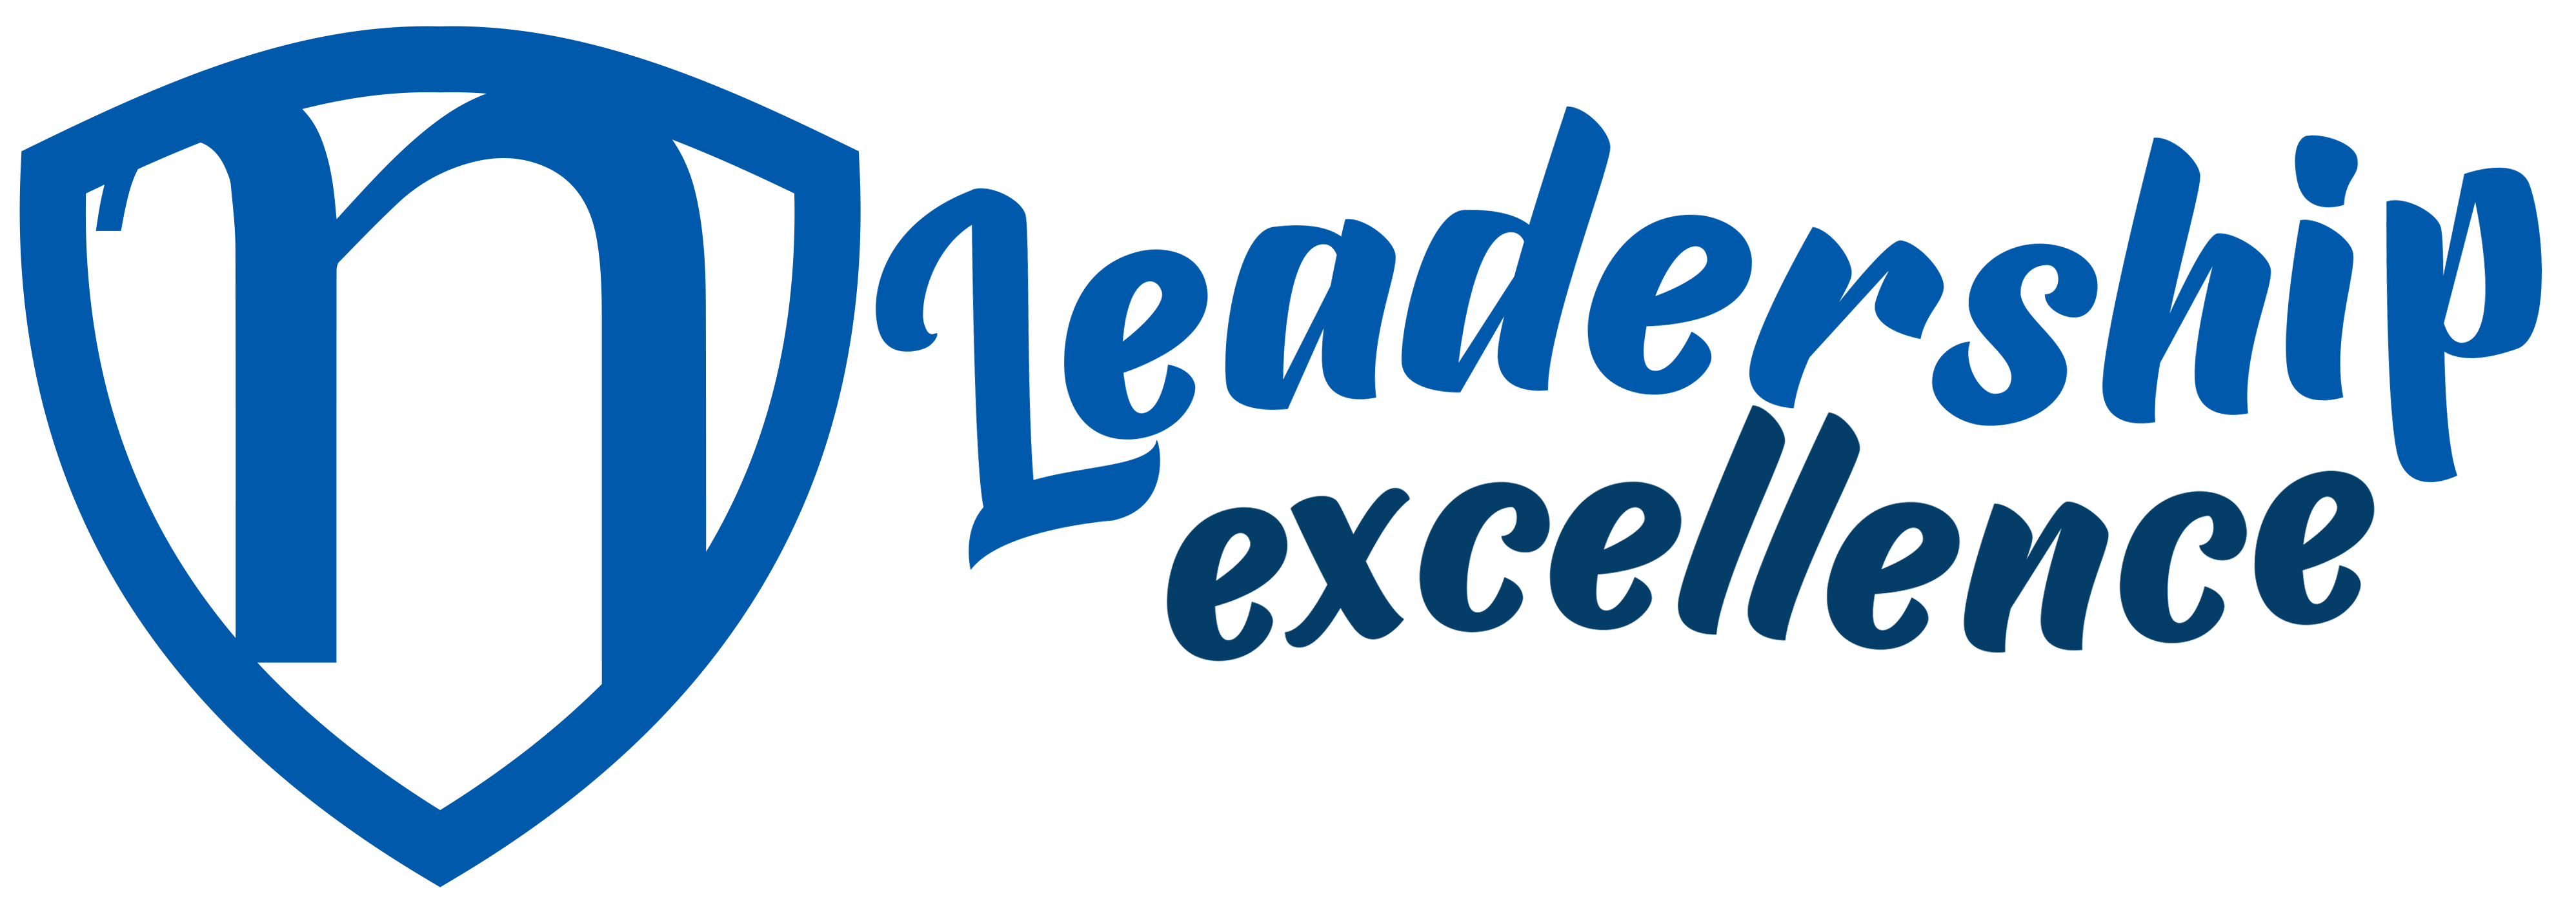 THE BEST IN LEADERSHIP EXCELLENCE TRAINING AND DEVELOPMENT